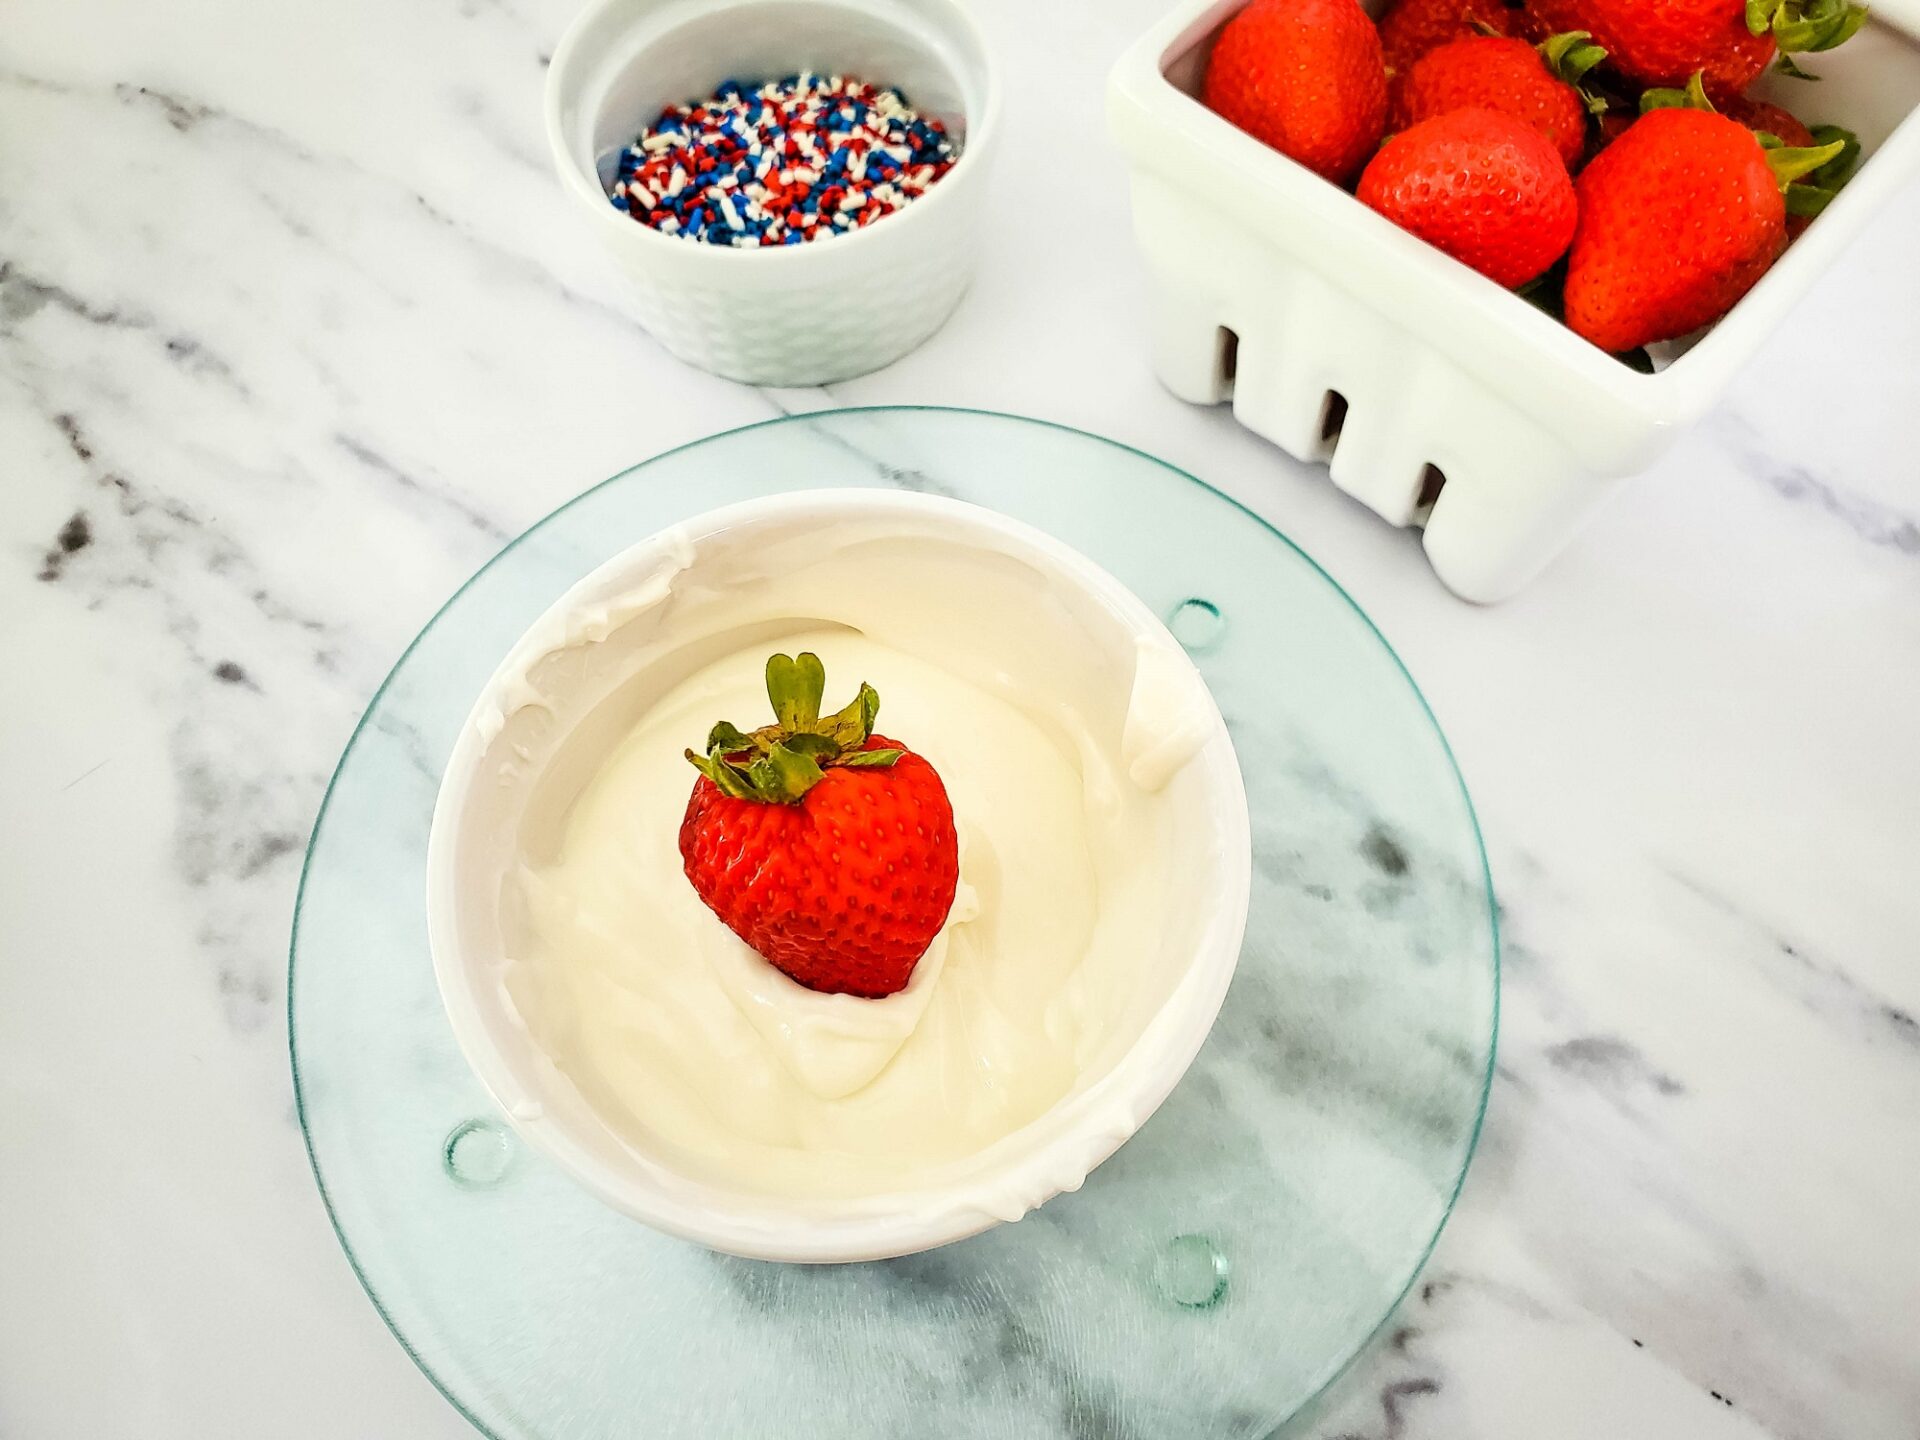 dipping a strawberry into melted white chocolate.